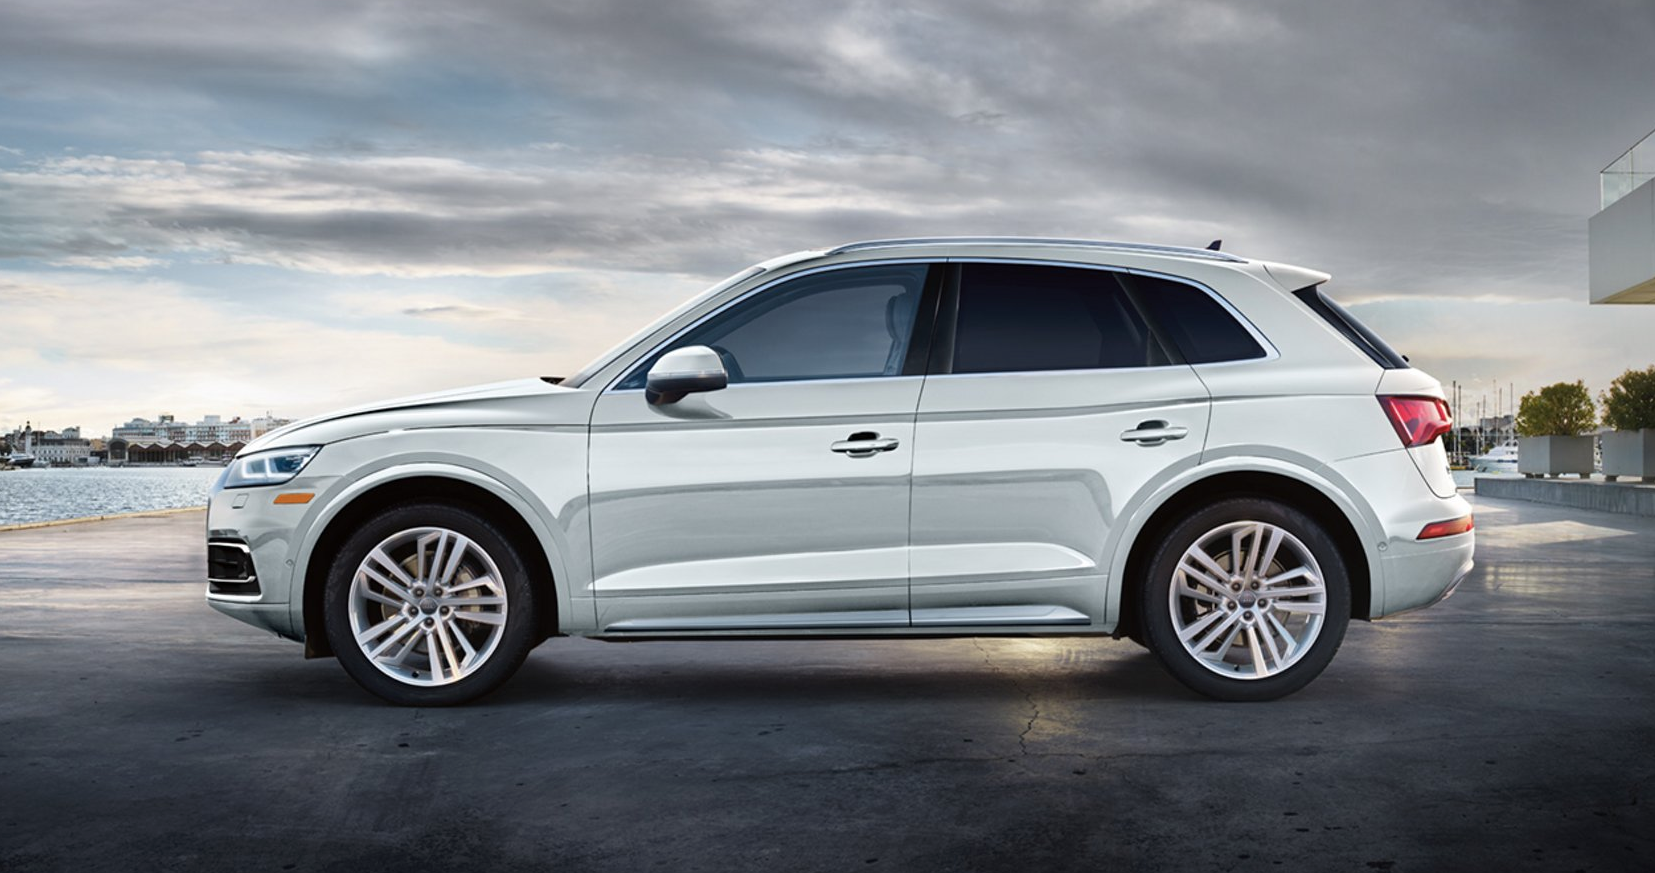 Audi Q5 The Best Luxury Compact SUV